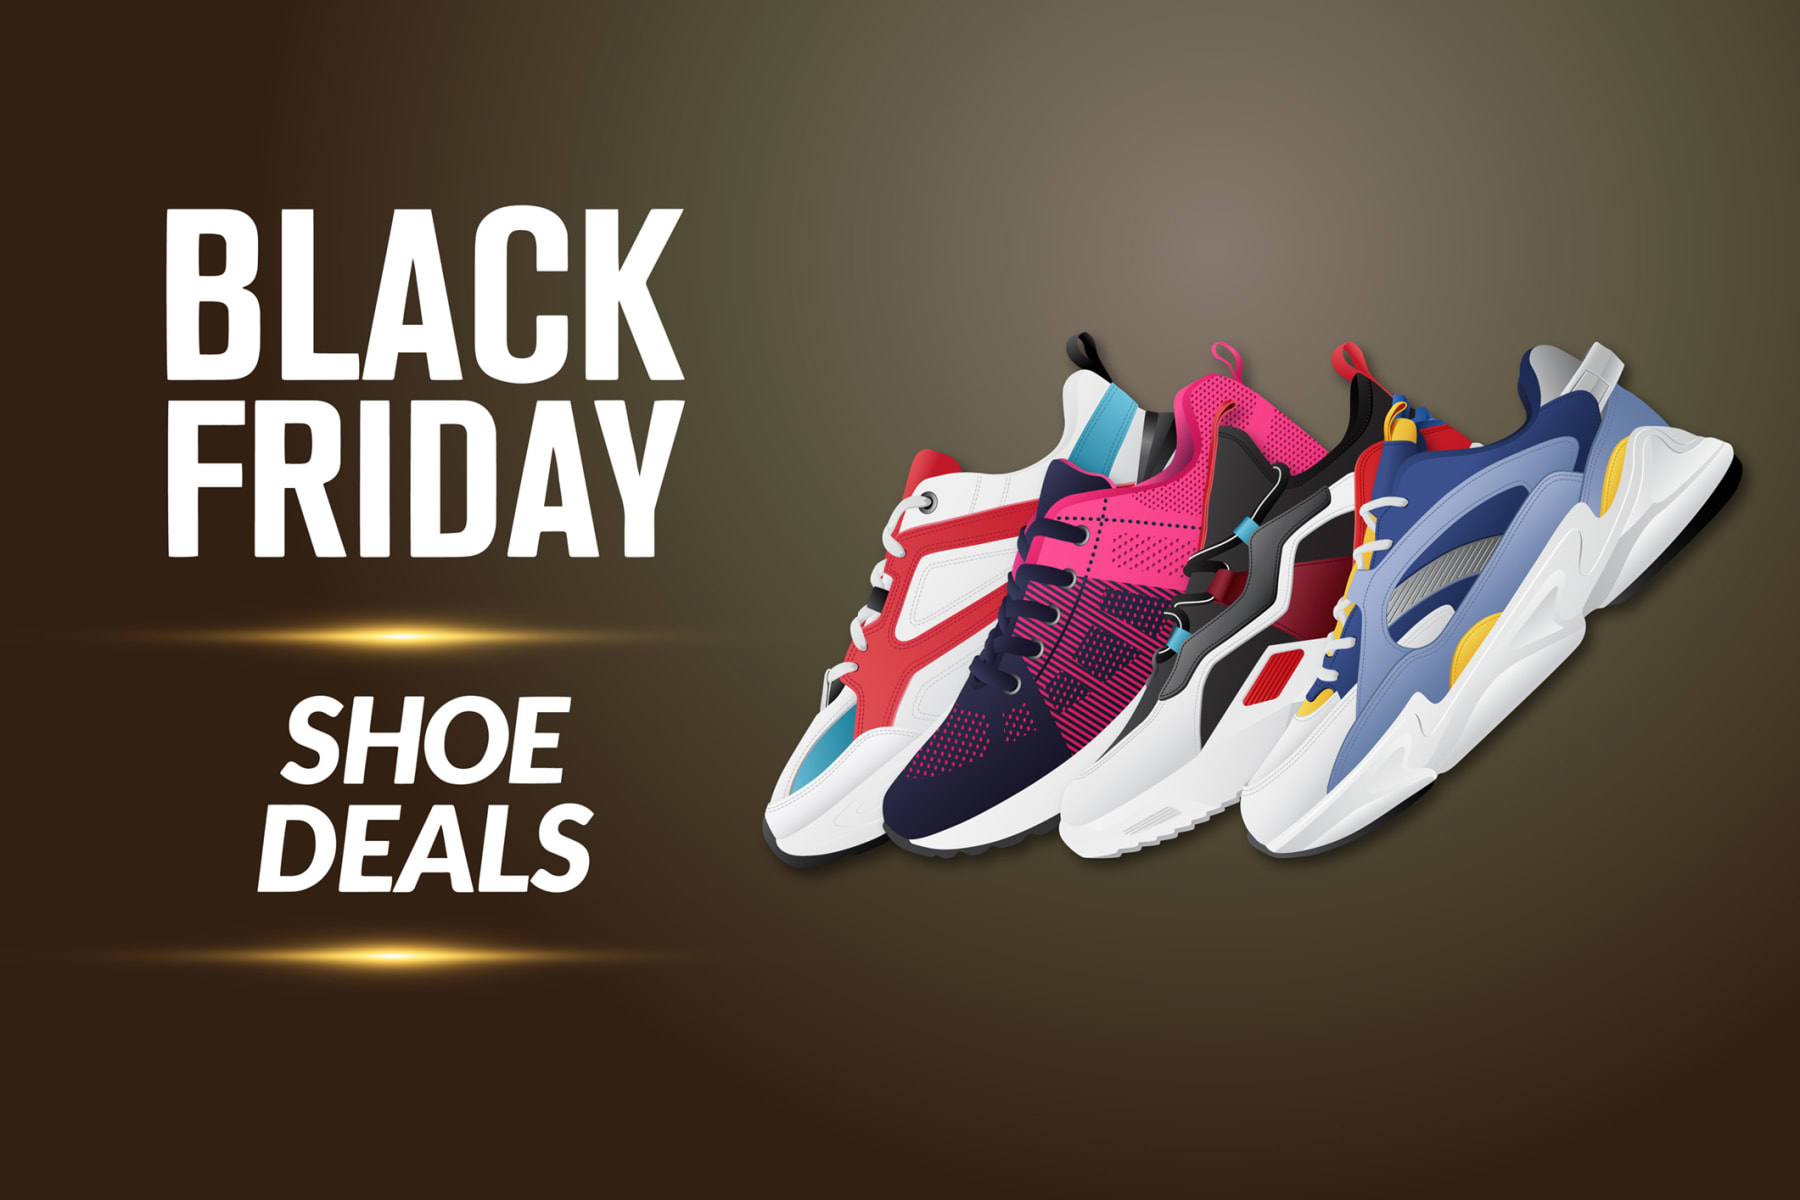 Sneakers sit next to text that reads Black Friday Shoe Deals.